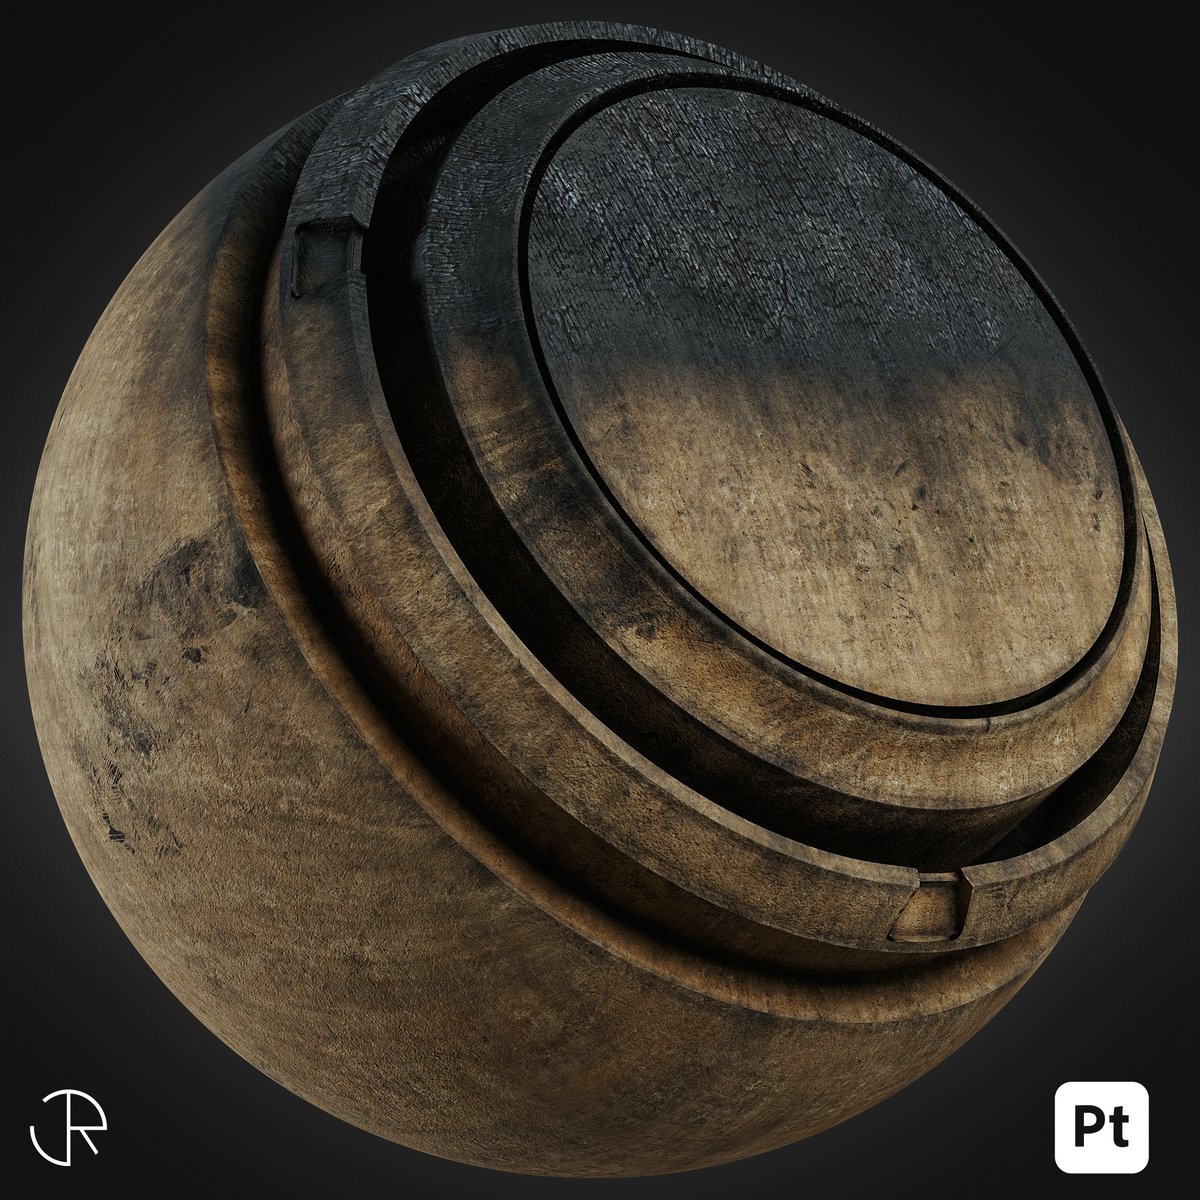 Ultimate Wood Smart Materials for Substance 3d painter+ Wooden Wall Panel Generator
They are available for download in my Artstation store

 #digitalart #Animation #3d #gameart #Digital3D #gamedesign #art #digitalart